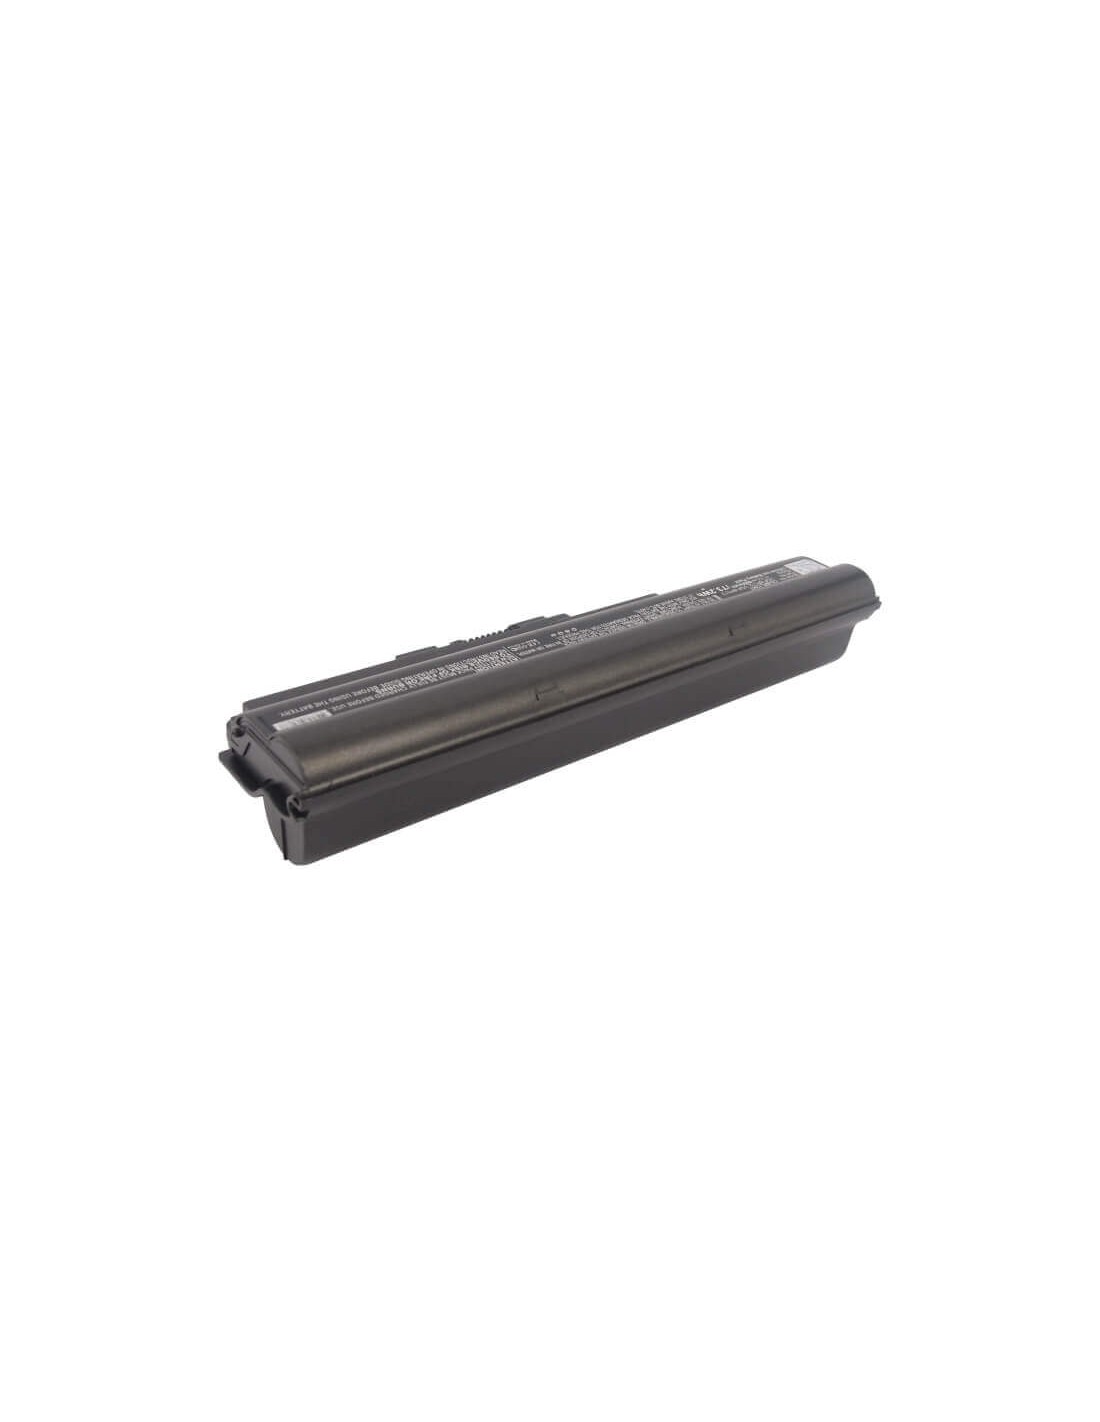 Black Battery for Sony Limited Edition 007, Vaio Vgn-z11mn/b, Vaio Vgn-z11vn/x 11.1V, 6600mAh - 73.26Wh